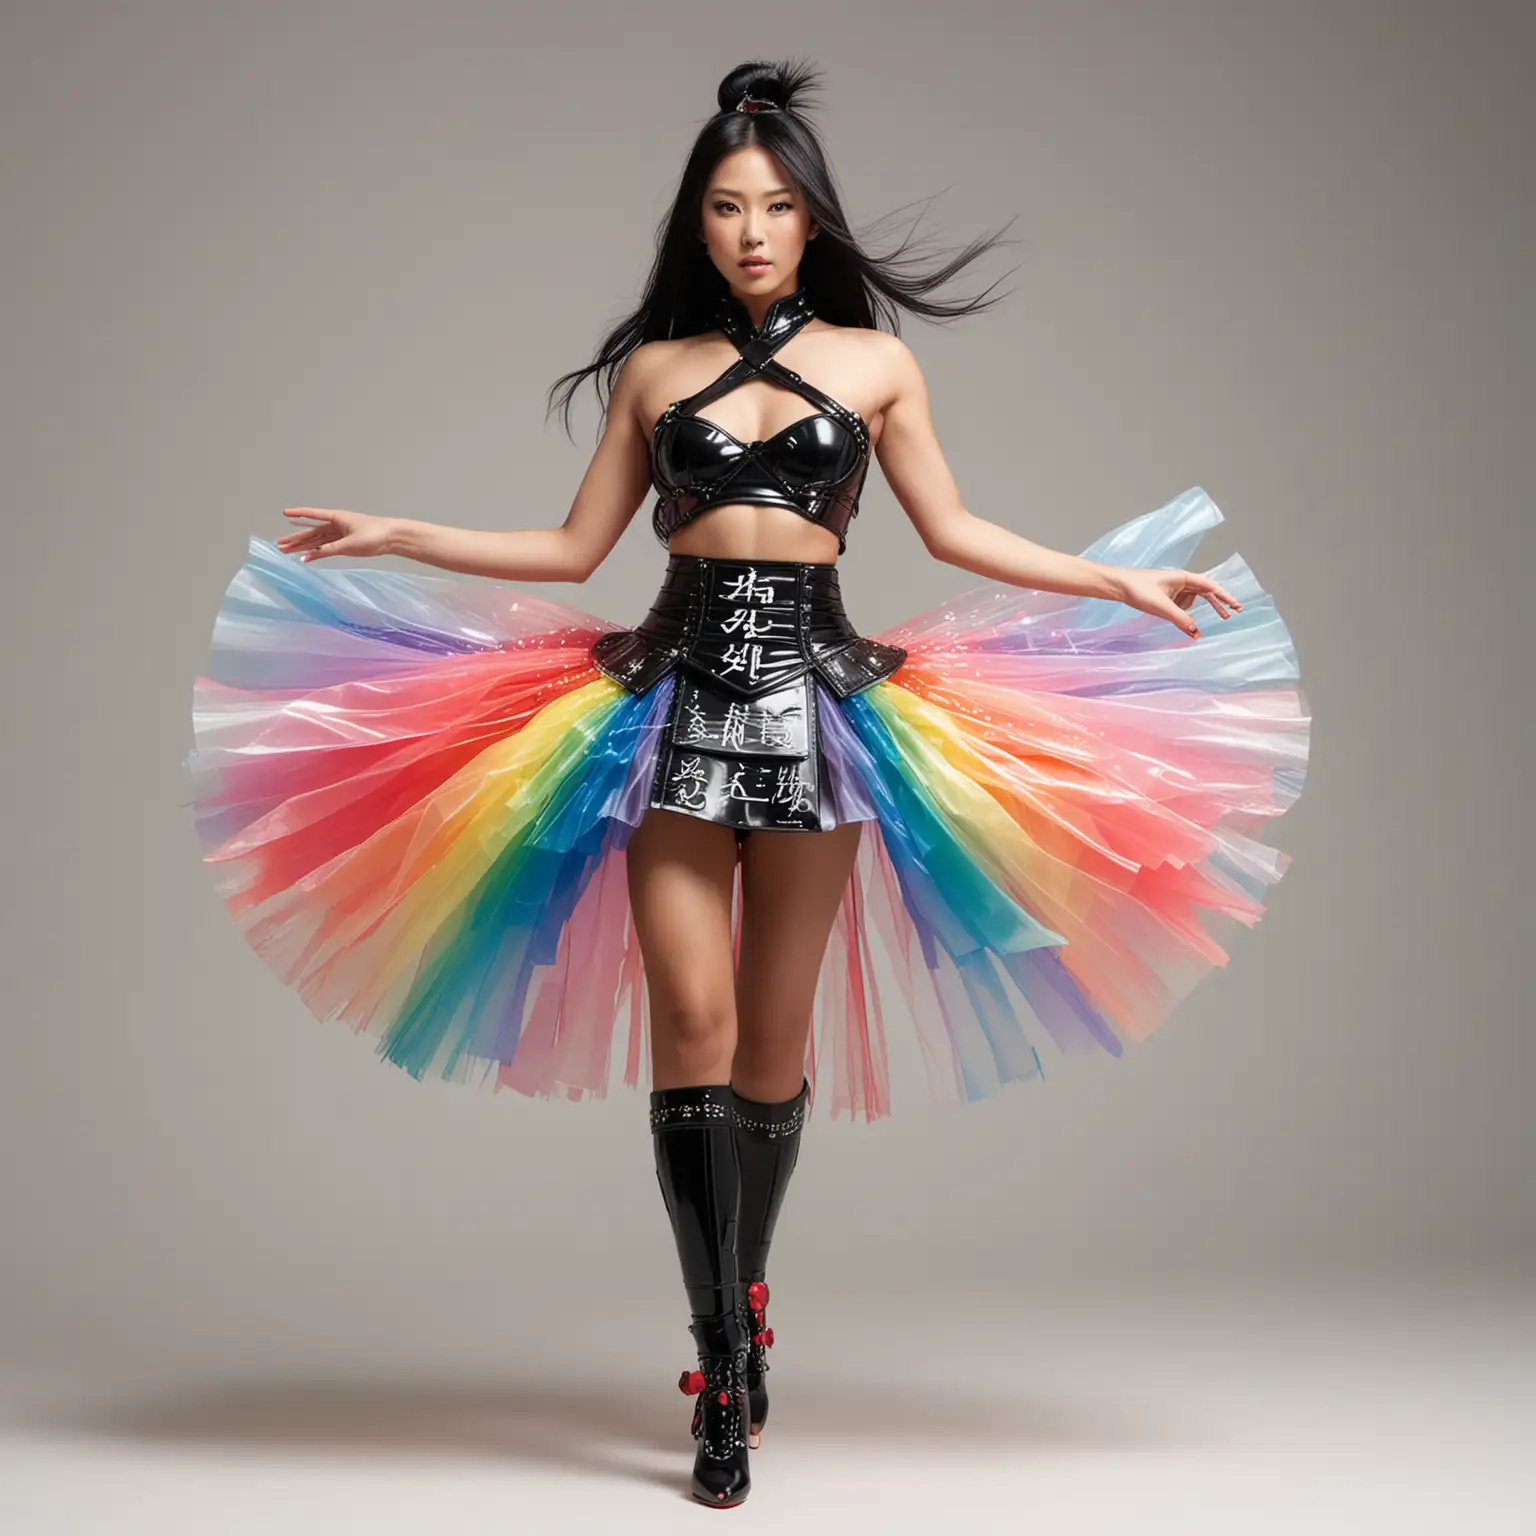 Standing front view, Beautiful toned athletic muscular figure female Japanese supermodel with large breasts, long black hair, giant puffy rainbow ballerina tutu, in sleeveless black plastic futuristic samurai-knight armor with white Chinese writing, exposed midriff, abs, red high-heels, white background